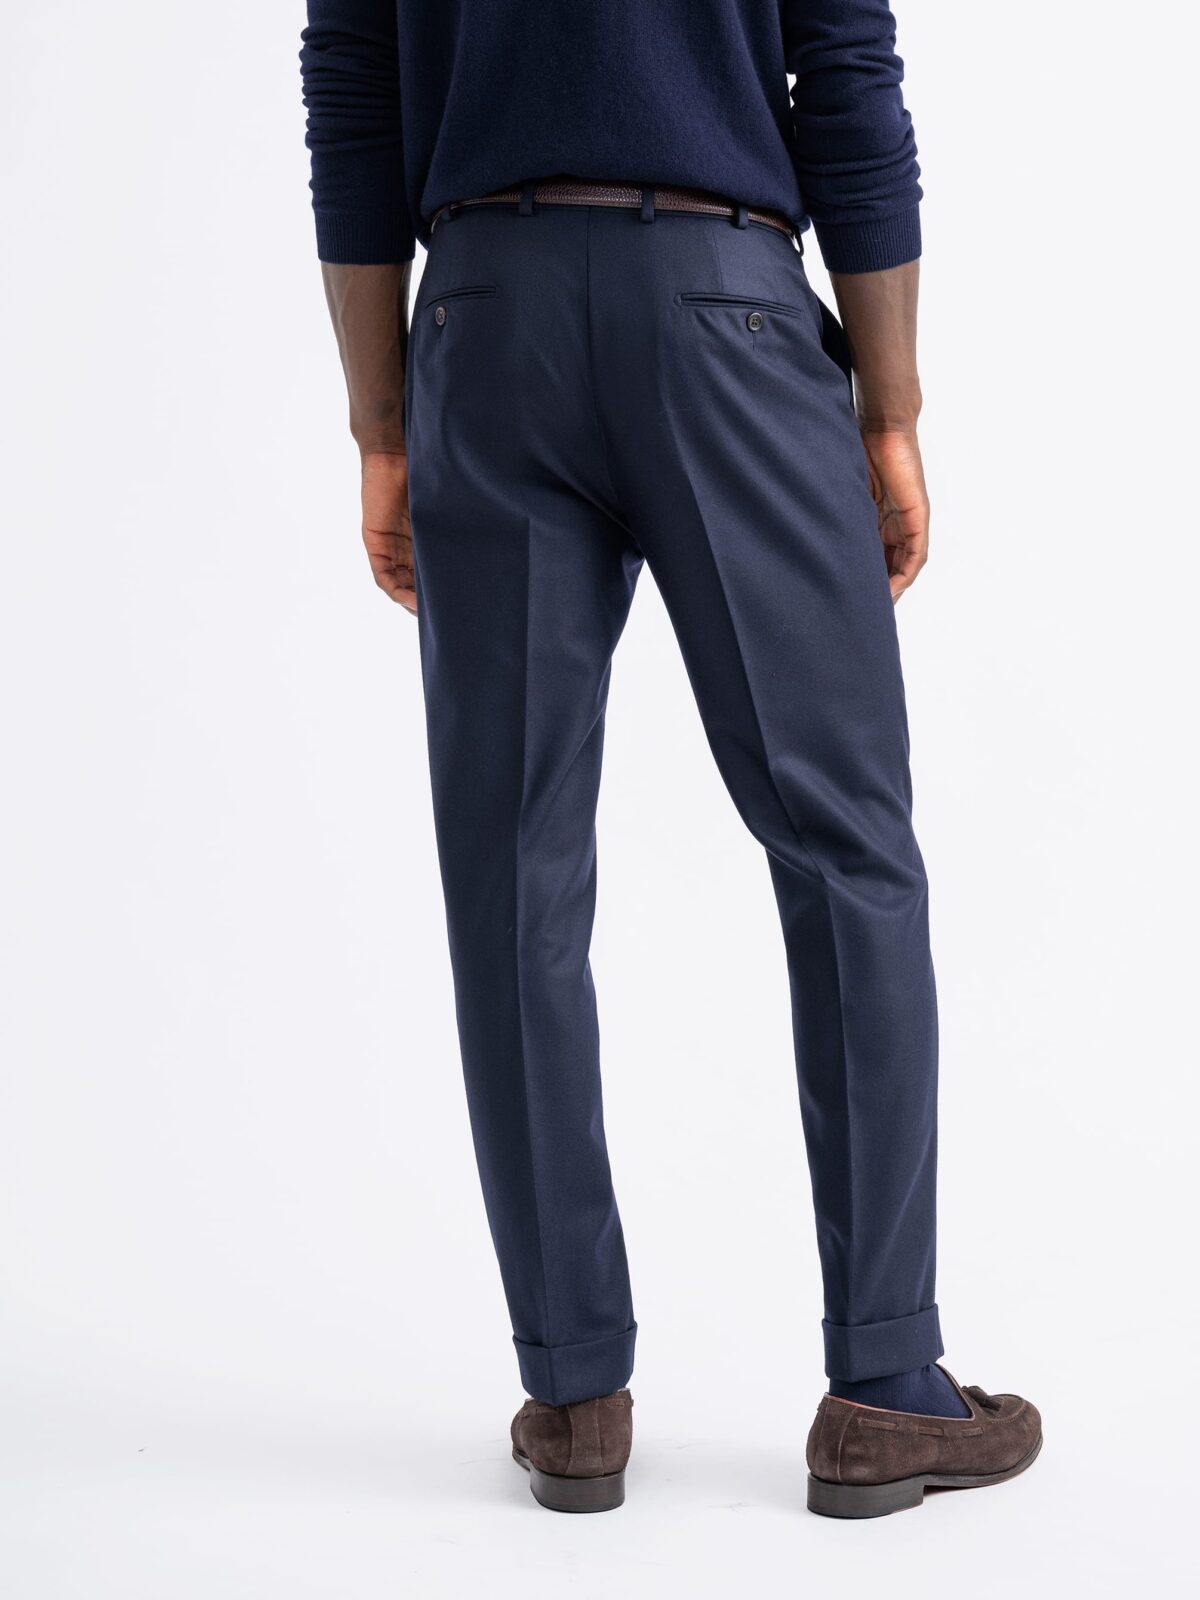 Wearing navy trousers as separates – Permanent Style